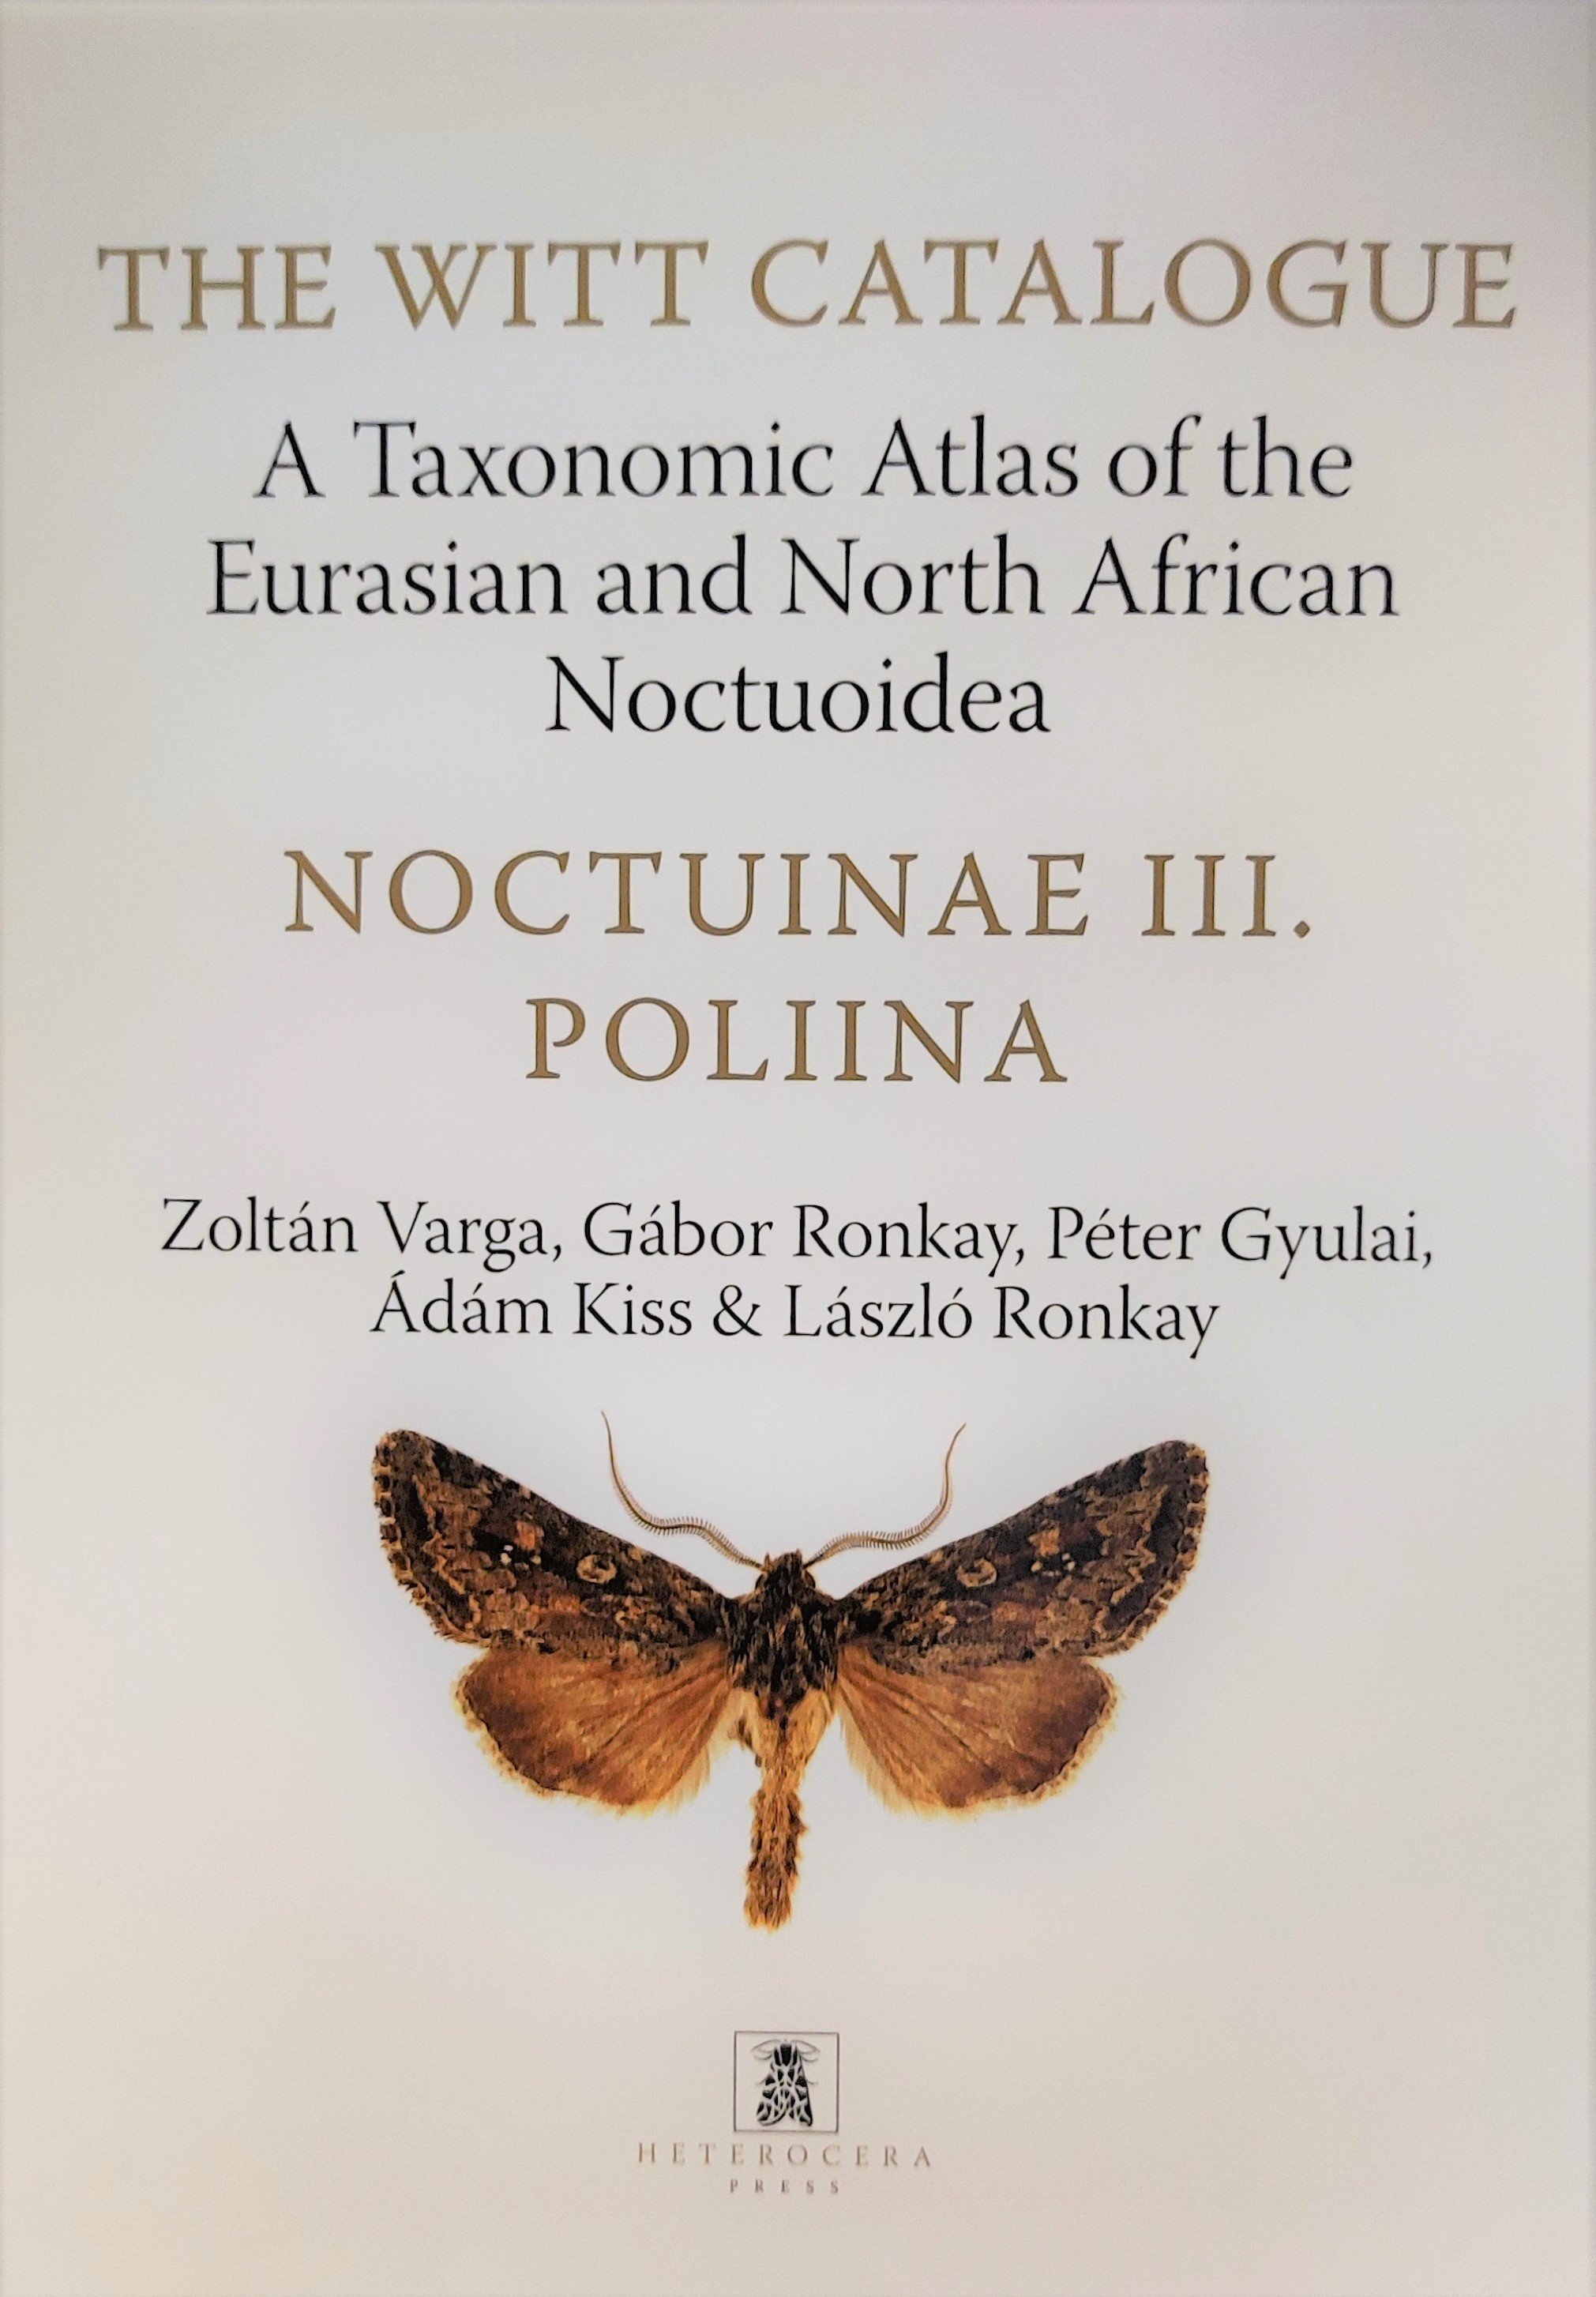 The Witt Catalogue: A Taxonomic Atlas of the Eurasian and North African Noctuoidea. volume 11. - Noctuinae 3. – Poliina (Rippl-Rónai Múzeum CC BY-NC-ND)